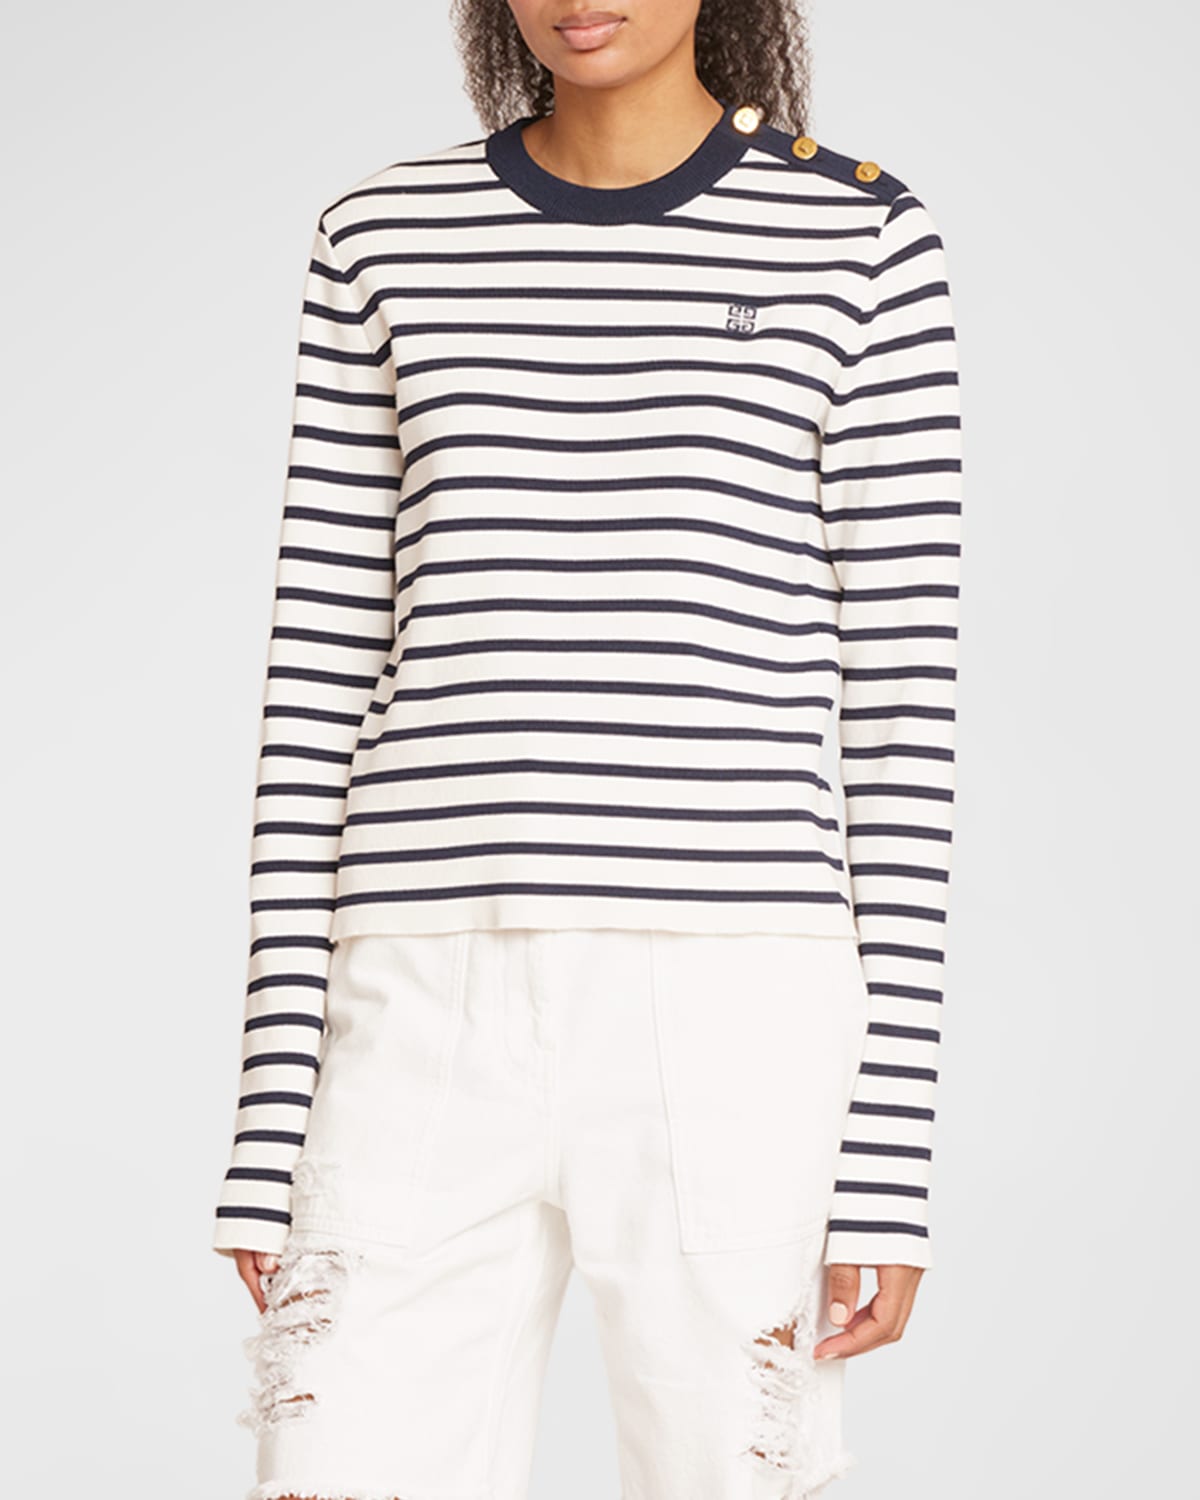 GIVENCHY STRIPED SAILOR SWEATER WITH SHOULDER BUTTONS